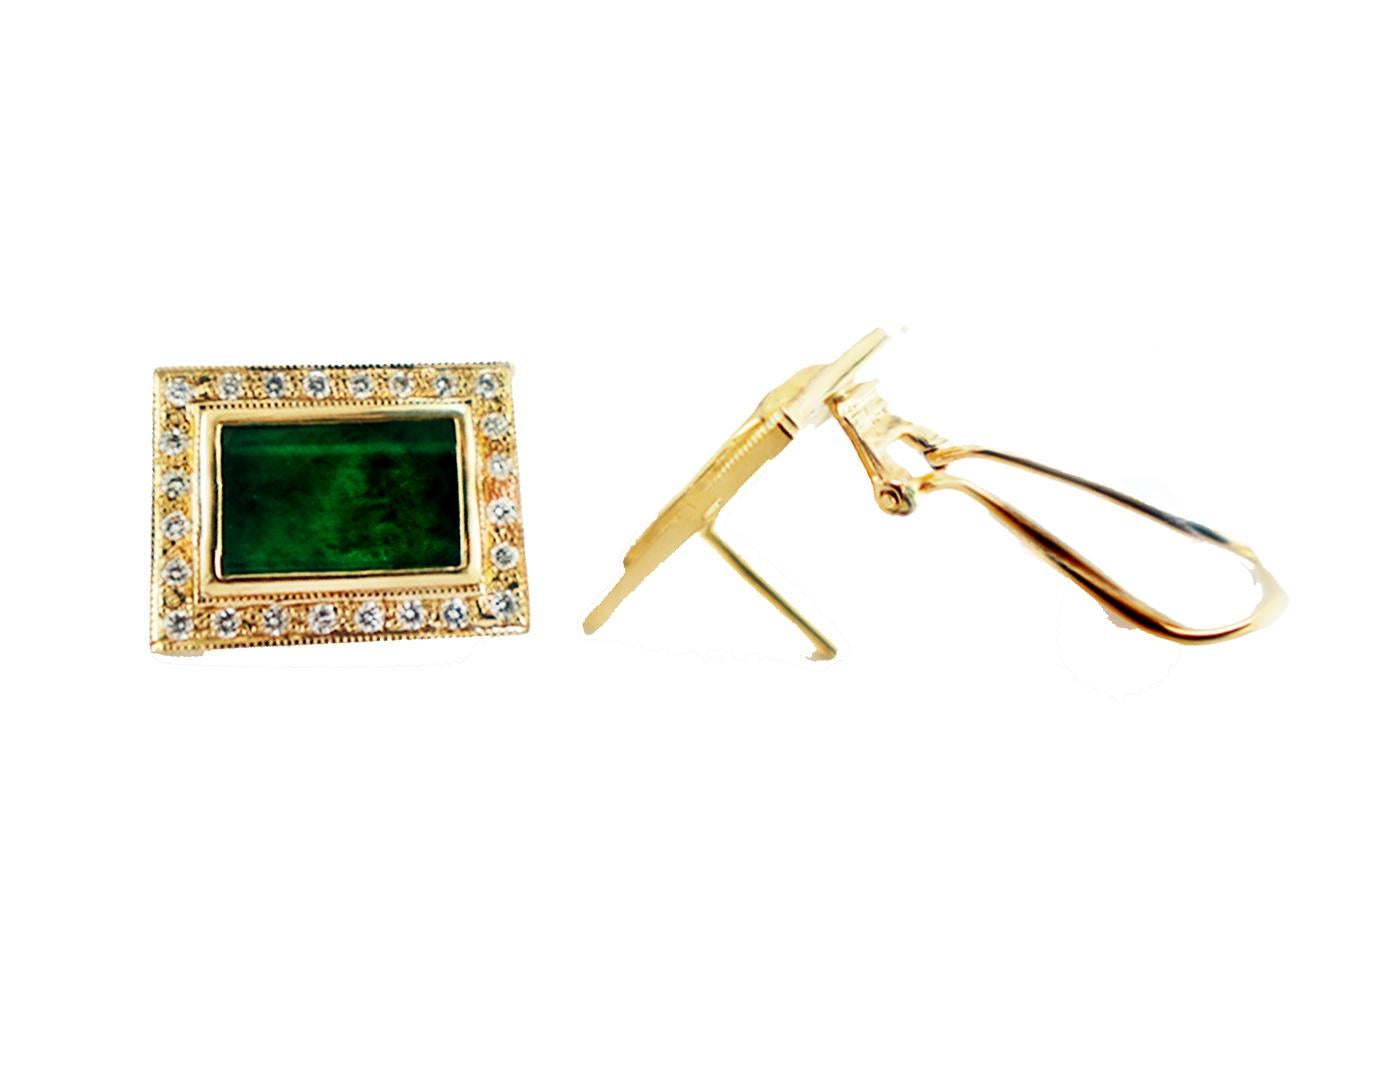 Jadeite and Diamond Earrings
Vintage earrings from estate are a great find and in great condition to be clean and sparkling upon your arrival.

Jade measures 14.30 x 9.20 x 3.60 mm in diameter and is rectangular in shape
The complete earring 21.70 x